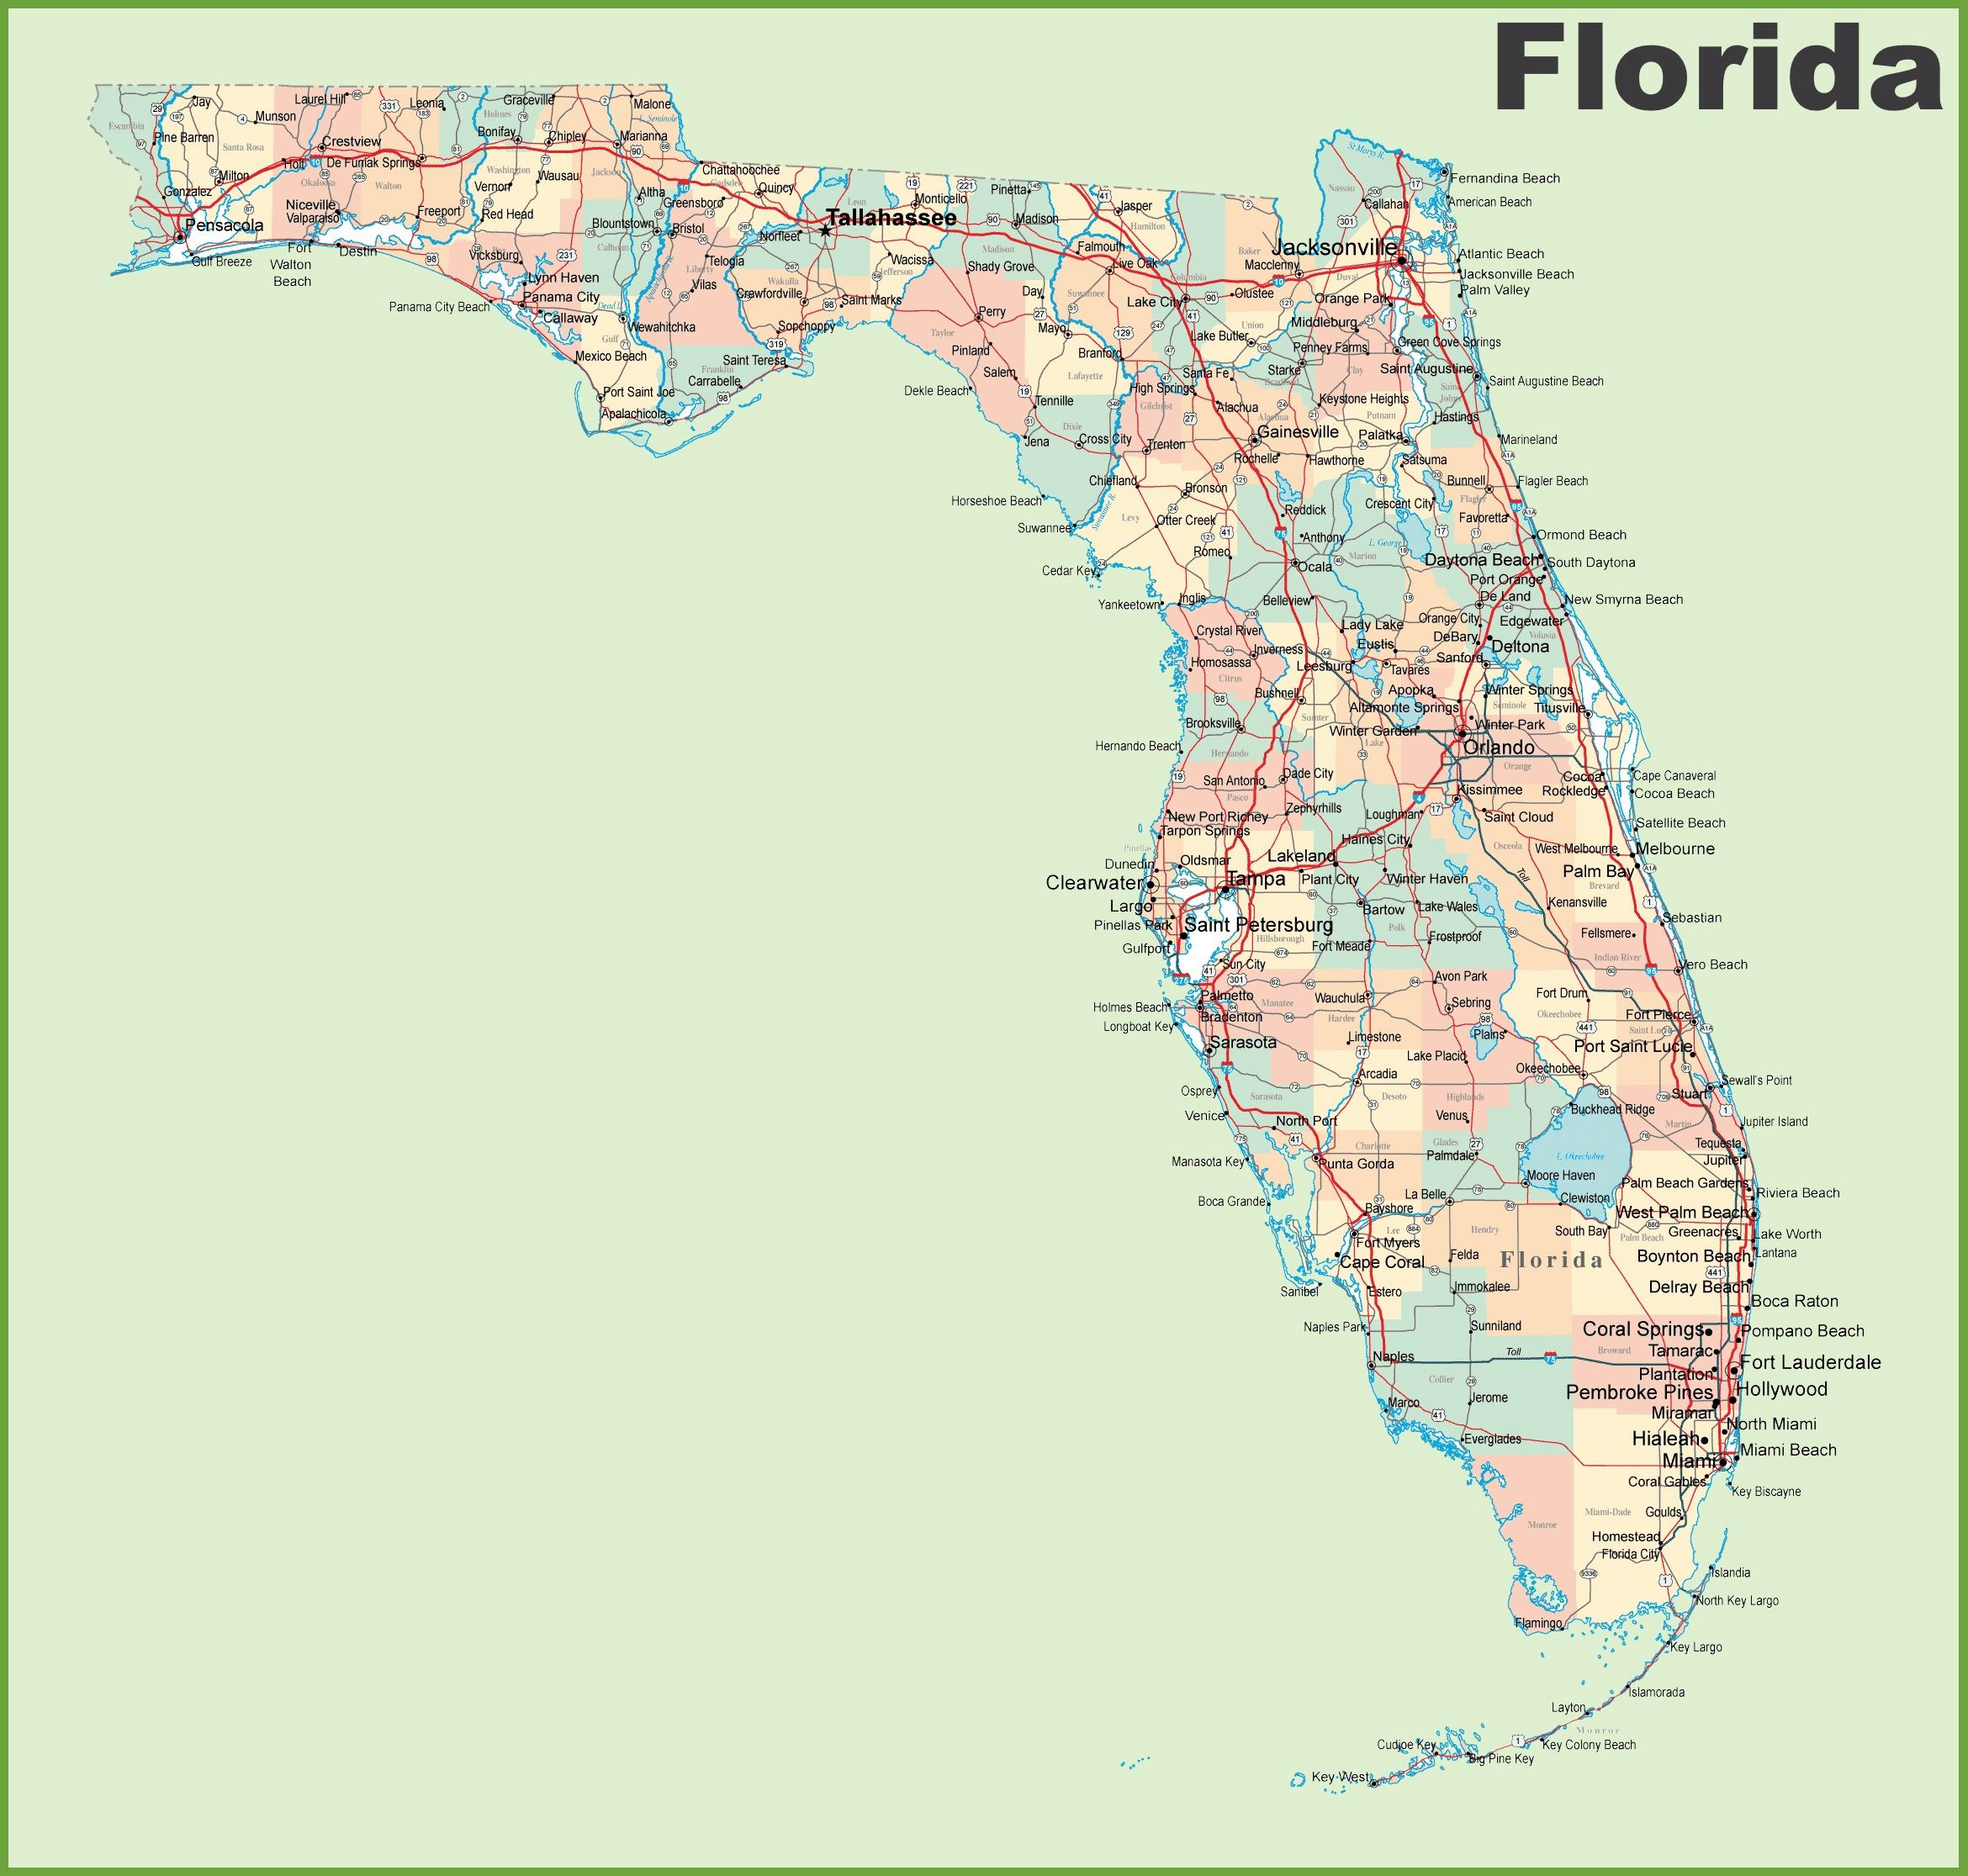 Large Florida Maps For Free Download And Print | High-Resolution And - Map Of Florida East Coast Beach Towns